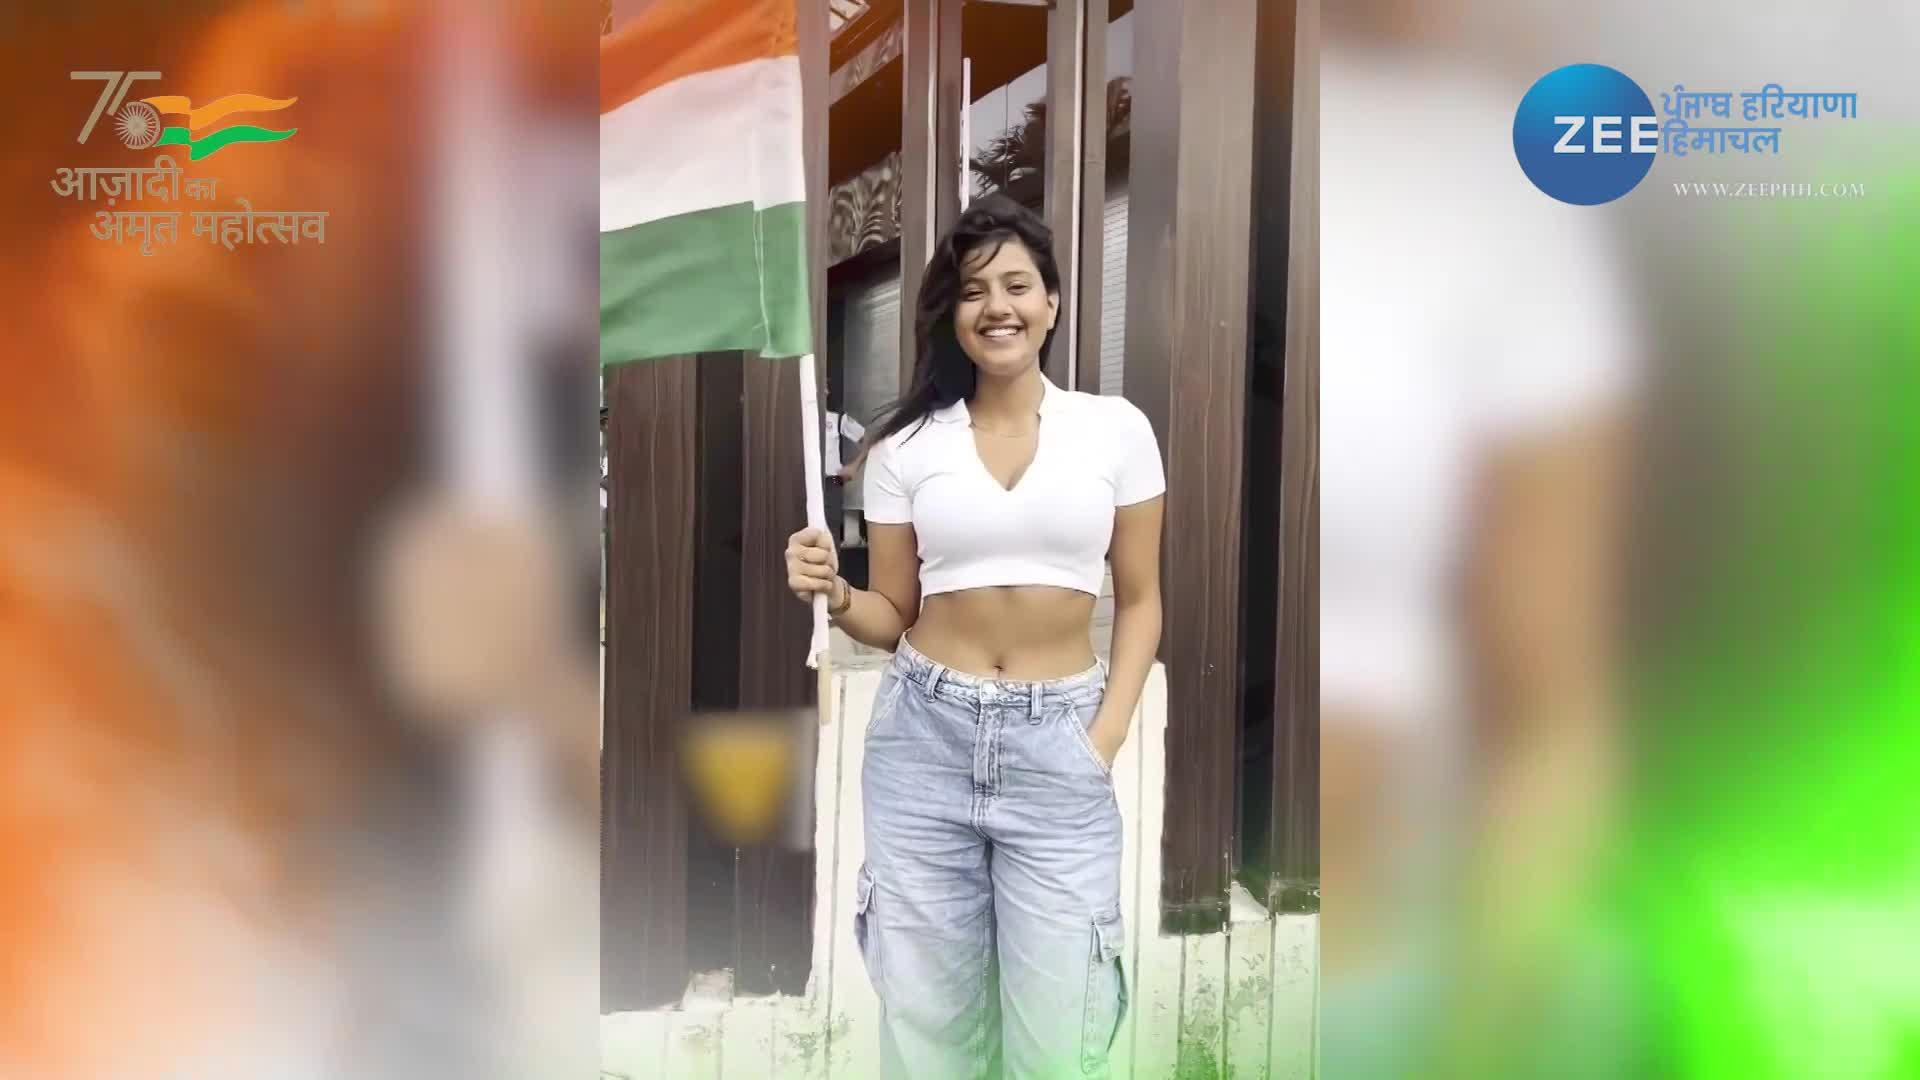 Anjali Arora new video viral with flag after mms watch full video plrh |  anjali arora video: à¤…à¤‚à¤œà¤²à¤¿ à¤…à¤°à¥‹à¤¡à¤¼à¤¾ à¤•à¤¾ à¤à¤• à¤”à¤° à¤µà¥€à¤¡à¤¿à¤¯à¥‹ à¤¹à¥‹ à¤°à¤¹à¤¾ à¤µà¤¾à¤¯à¤°à¤², à¤¯à¥‚à¤œà¤°à¥à¤¸ à¤•à¤°  à¤œà¤®à¤•à¤° à¤Ÿà¥à¤°à¥‹